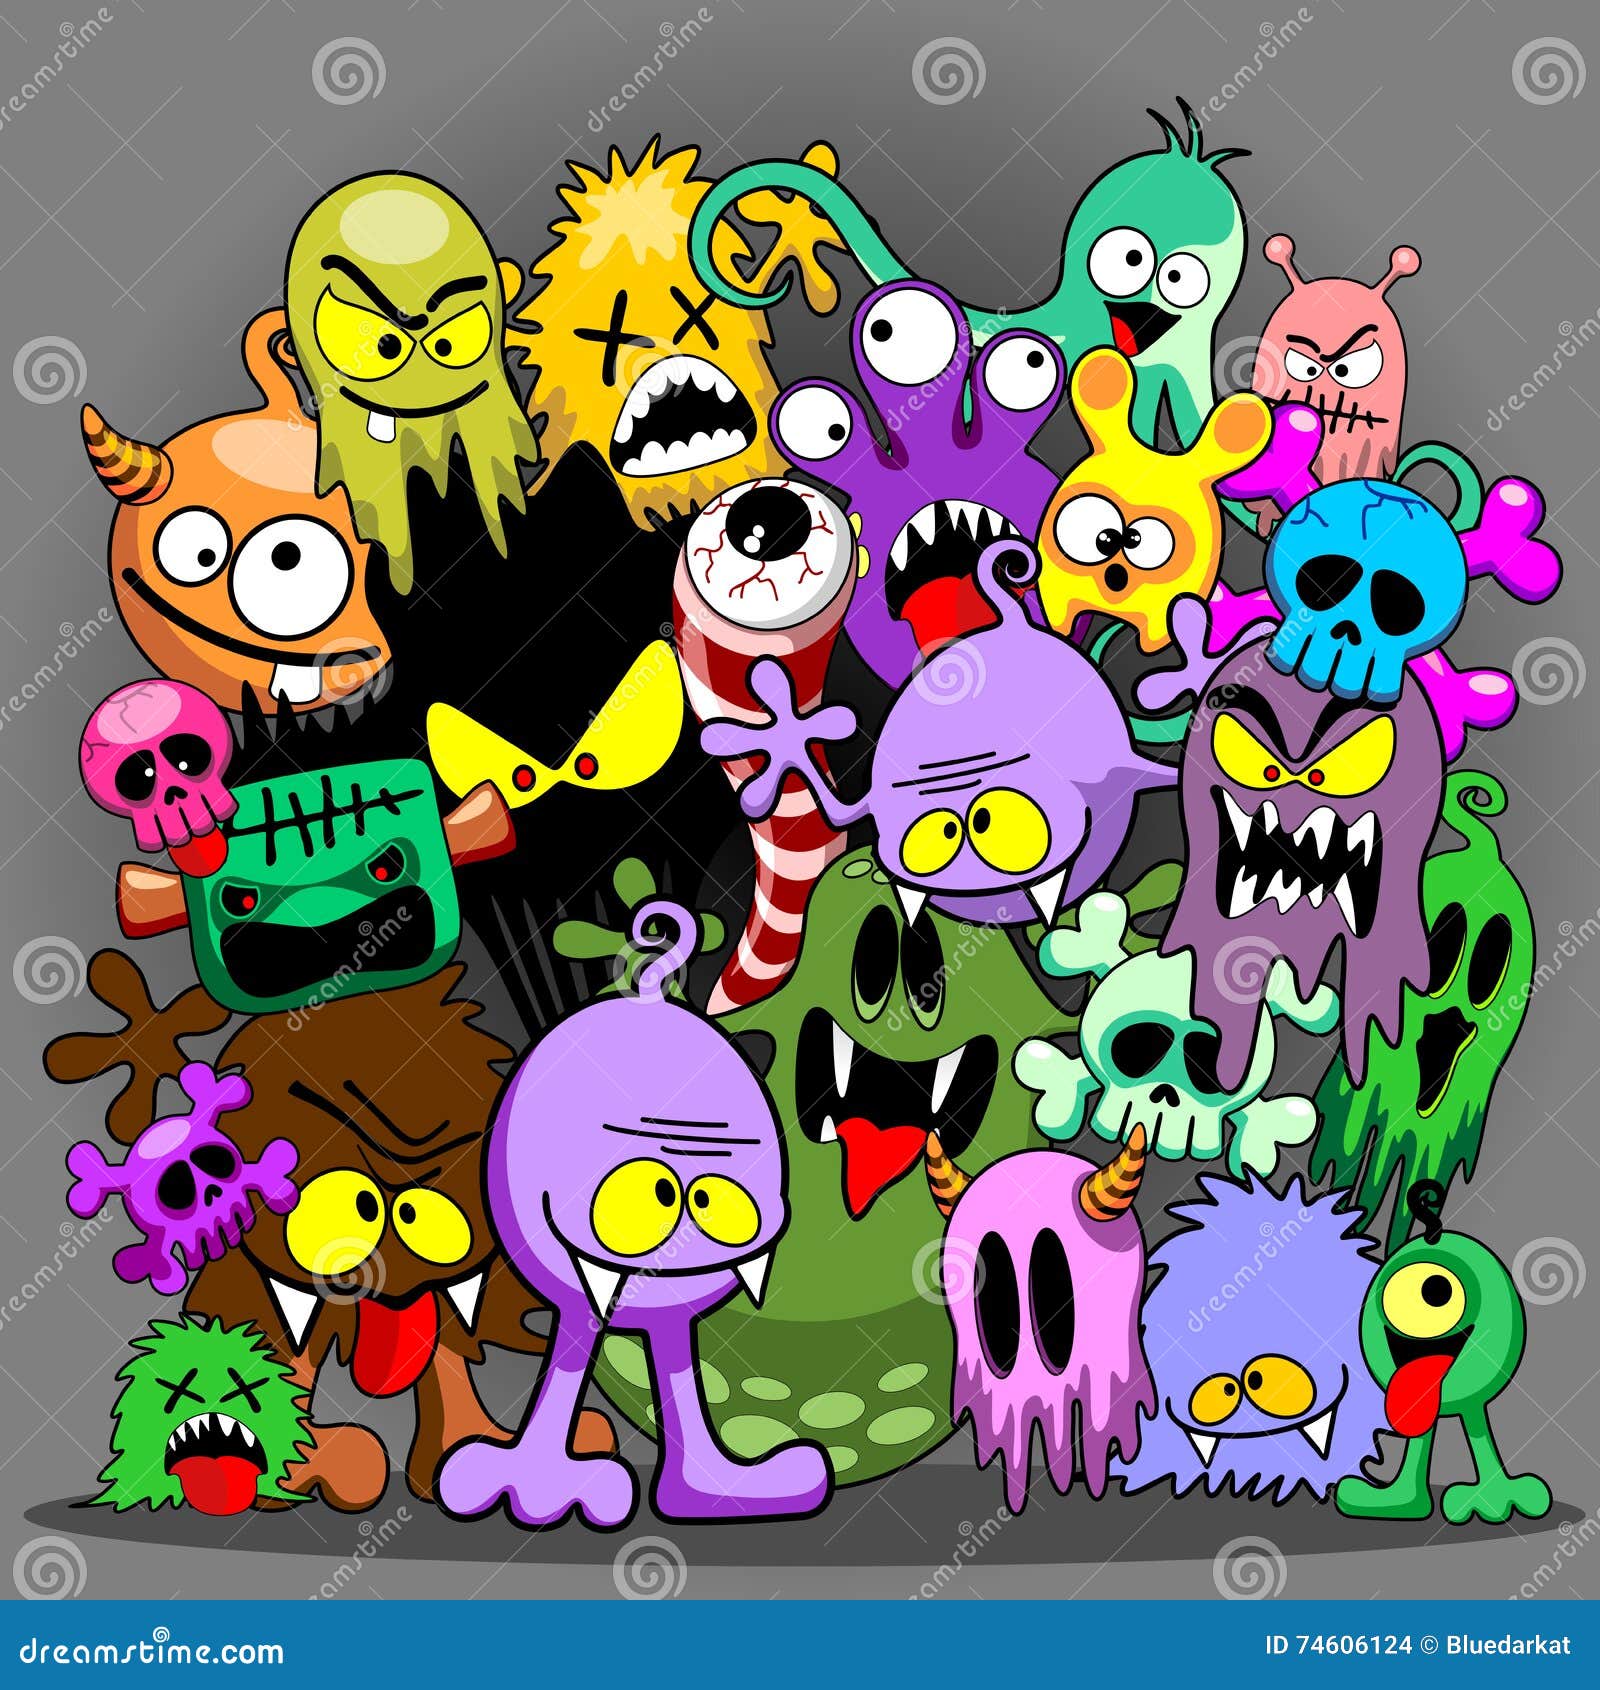 Monsters Doodles Spooky Characters Stock Vector - Illustration of creepy,  cute: 74606124